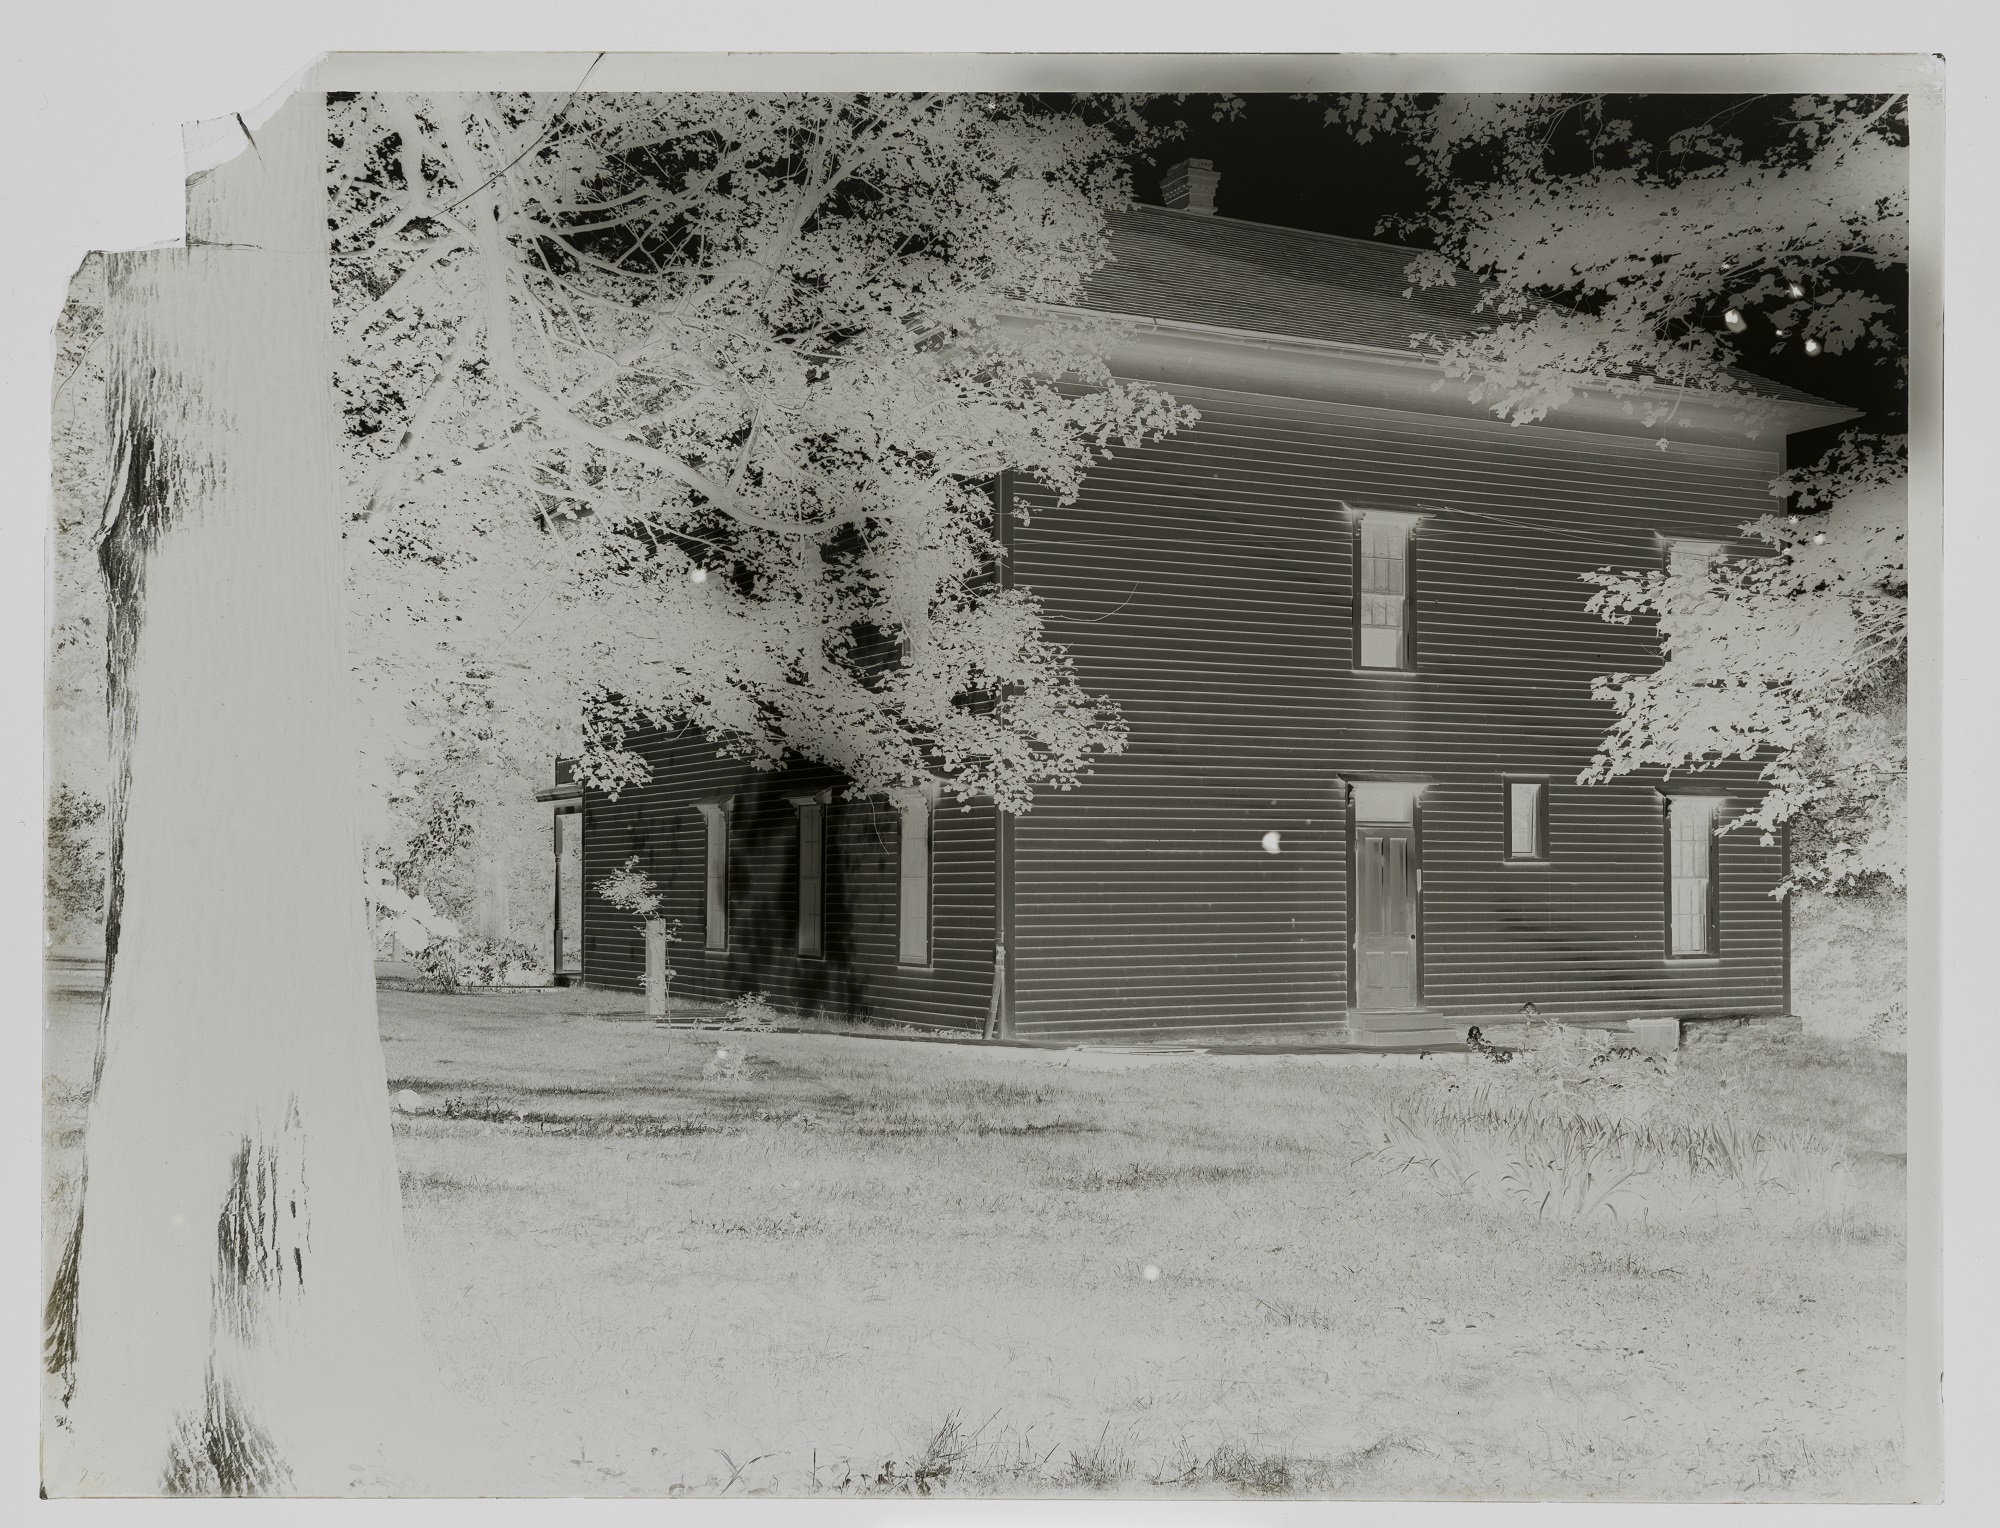 A glass plate negative of a St. Olaf campus building by O.G. Felland.